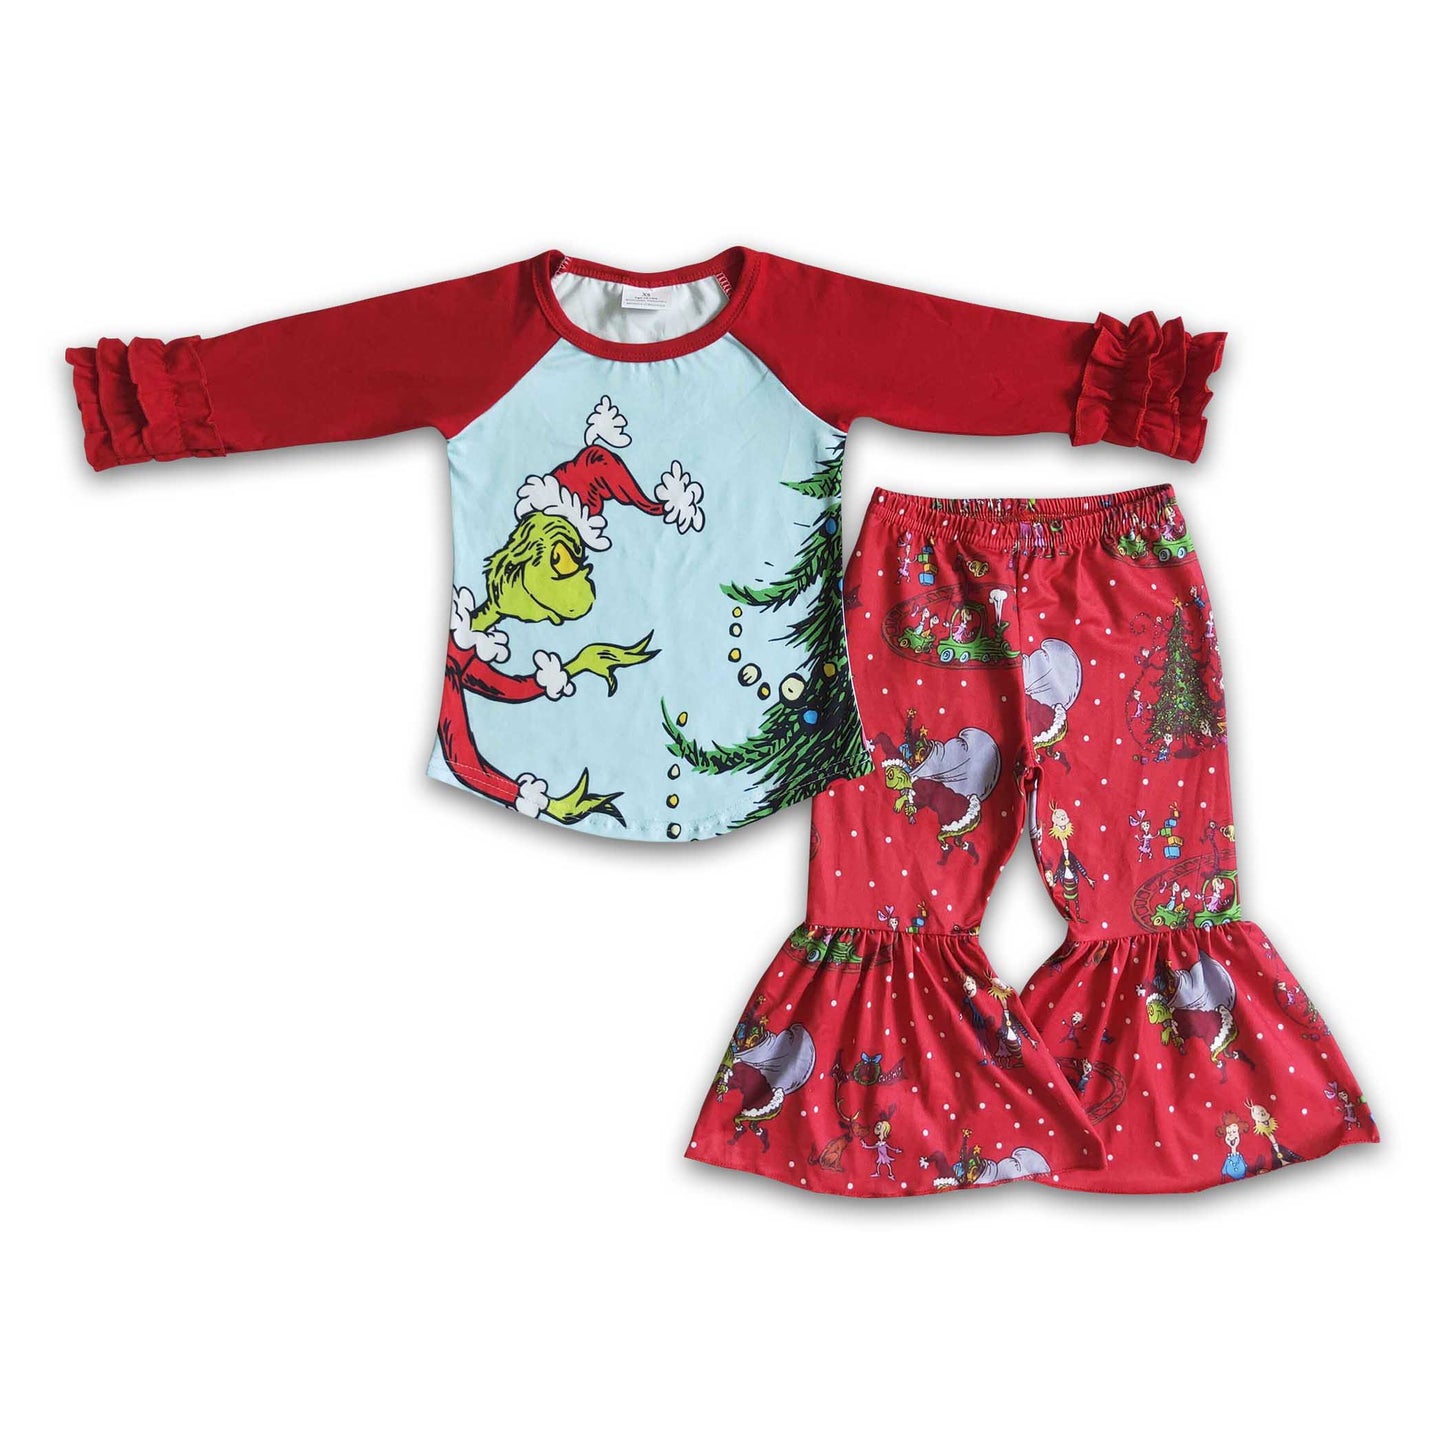 Cute green face print baby kids Christmas clothing